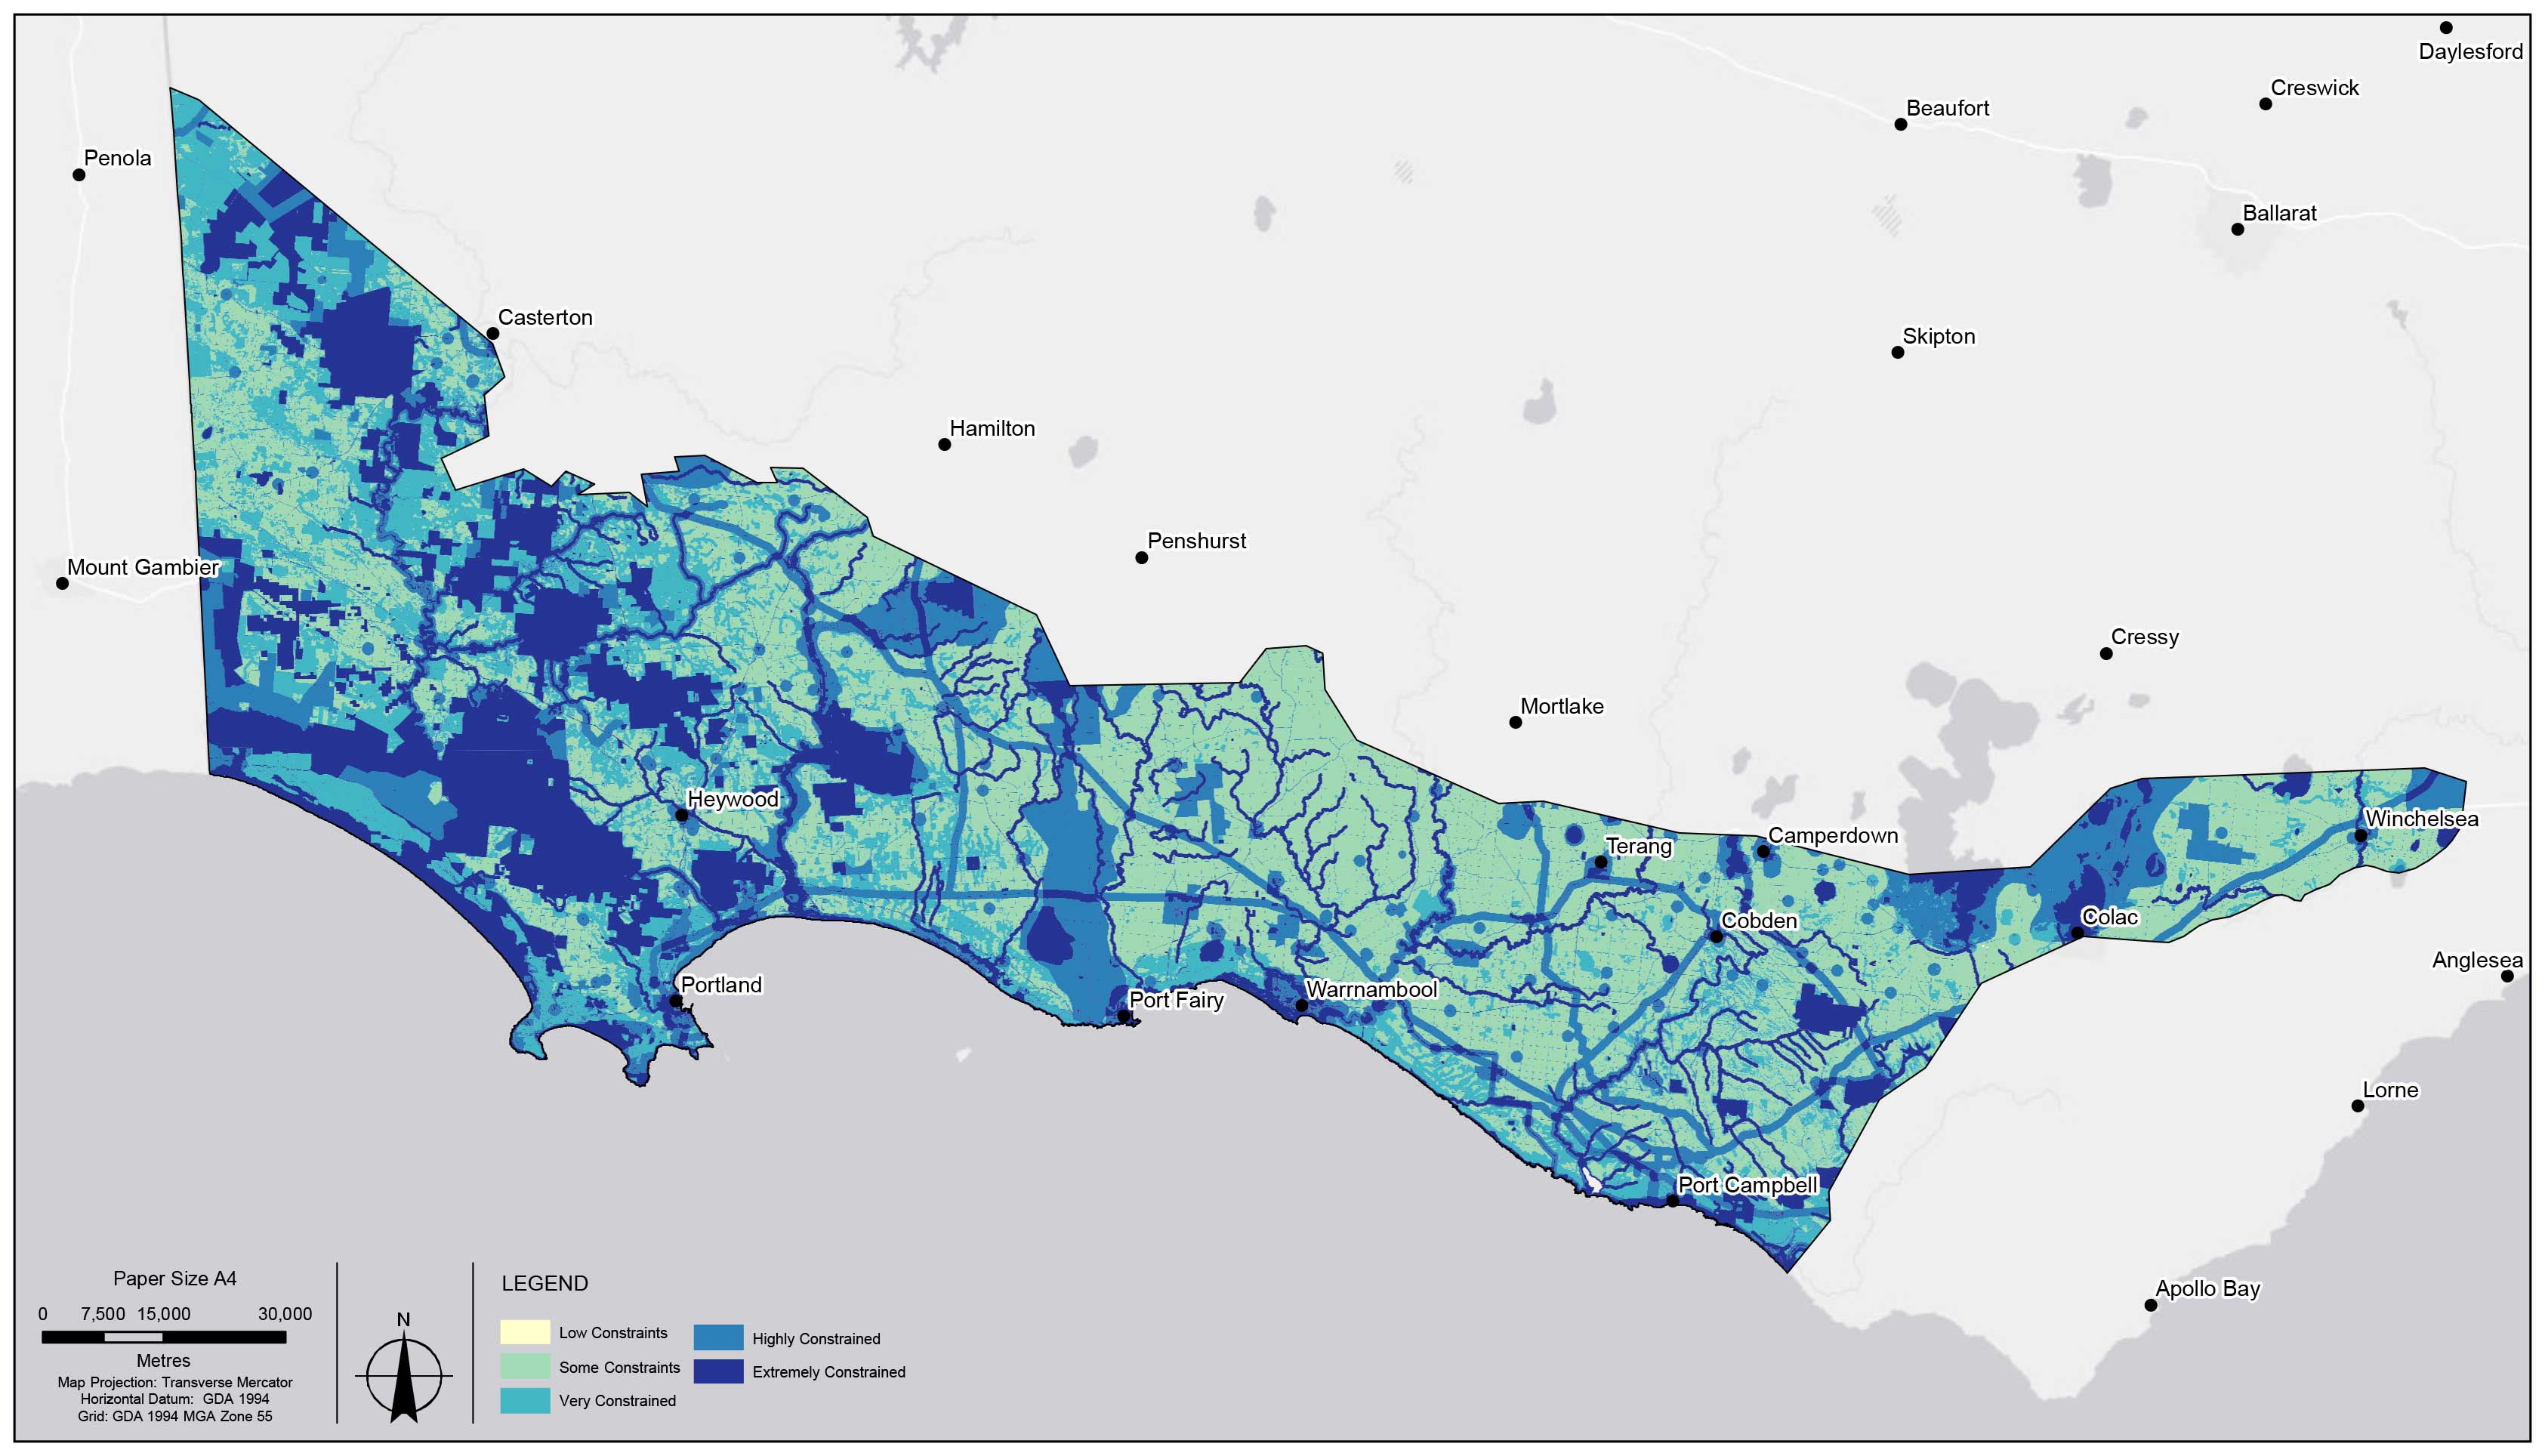 Visualisation of land uses and landscape sensitivities across south west Victoria